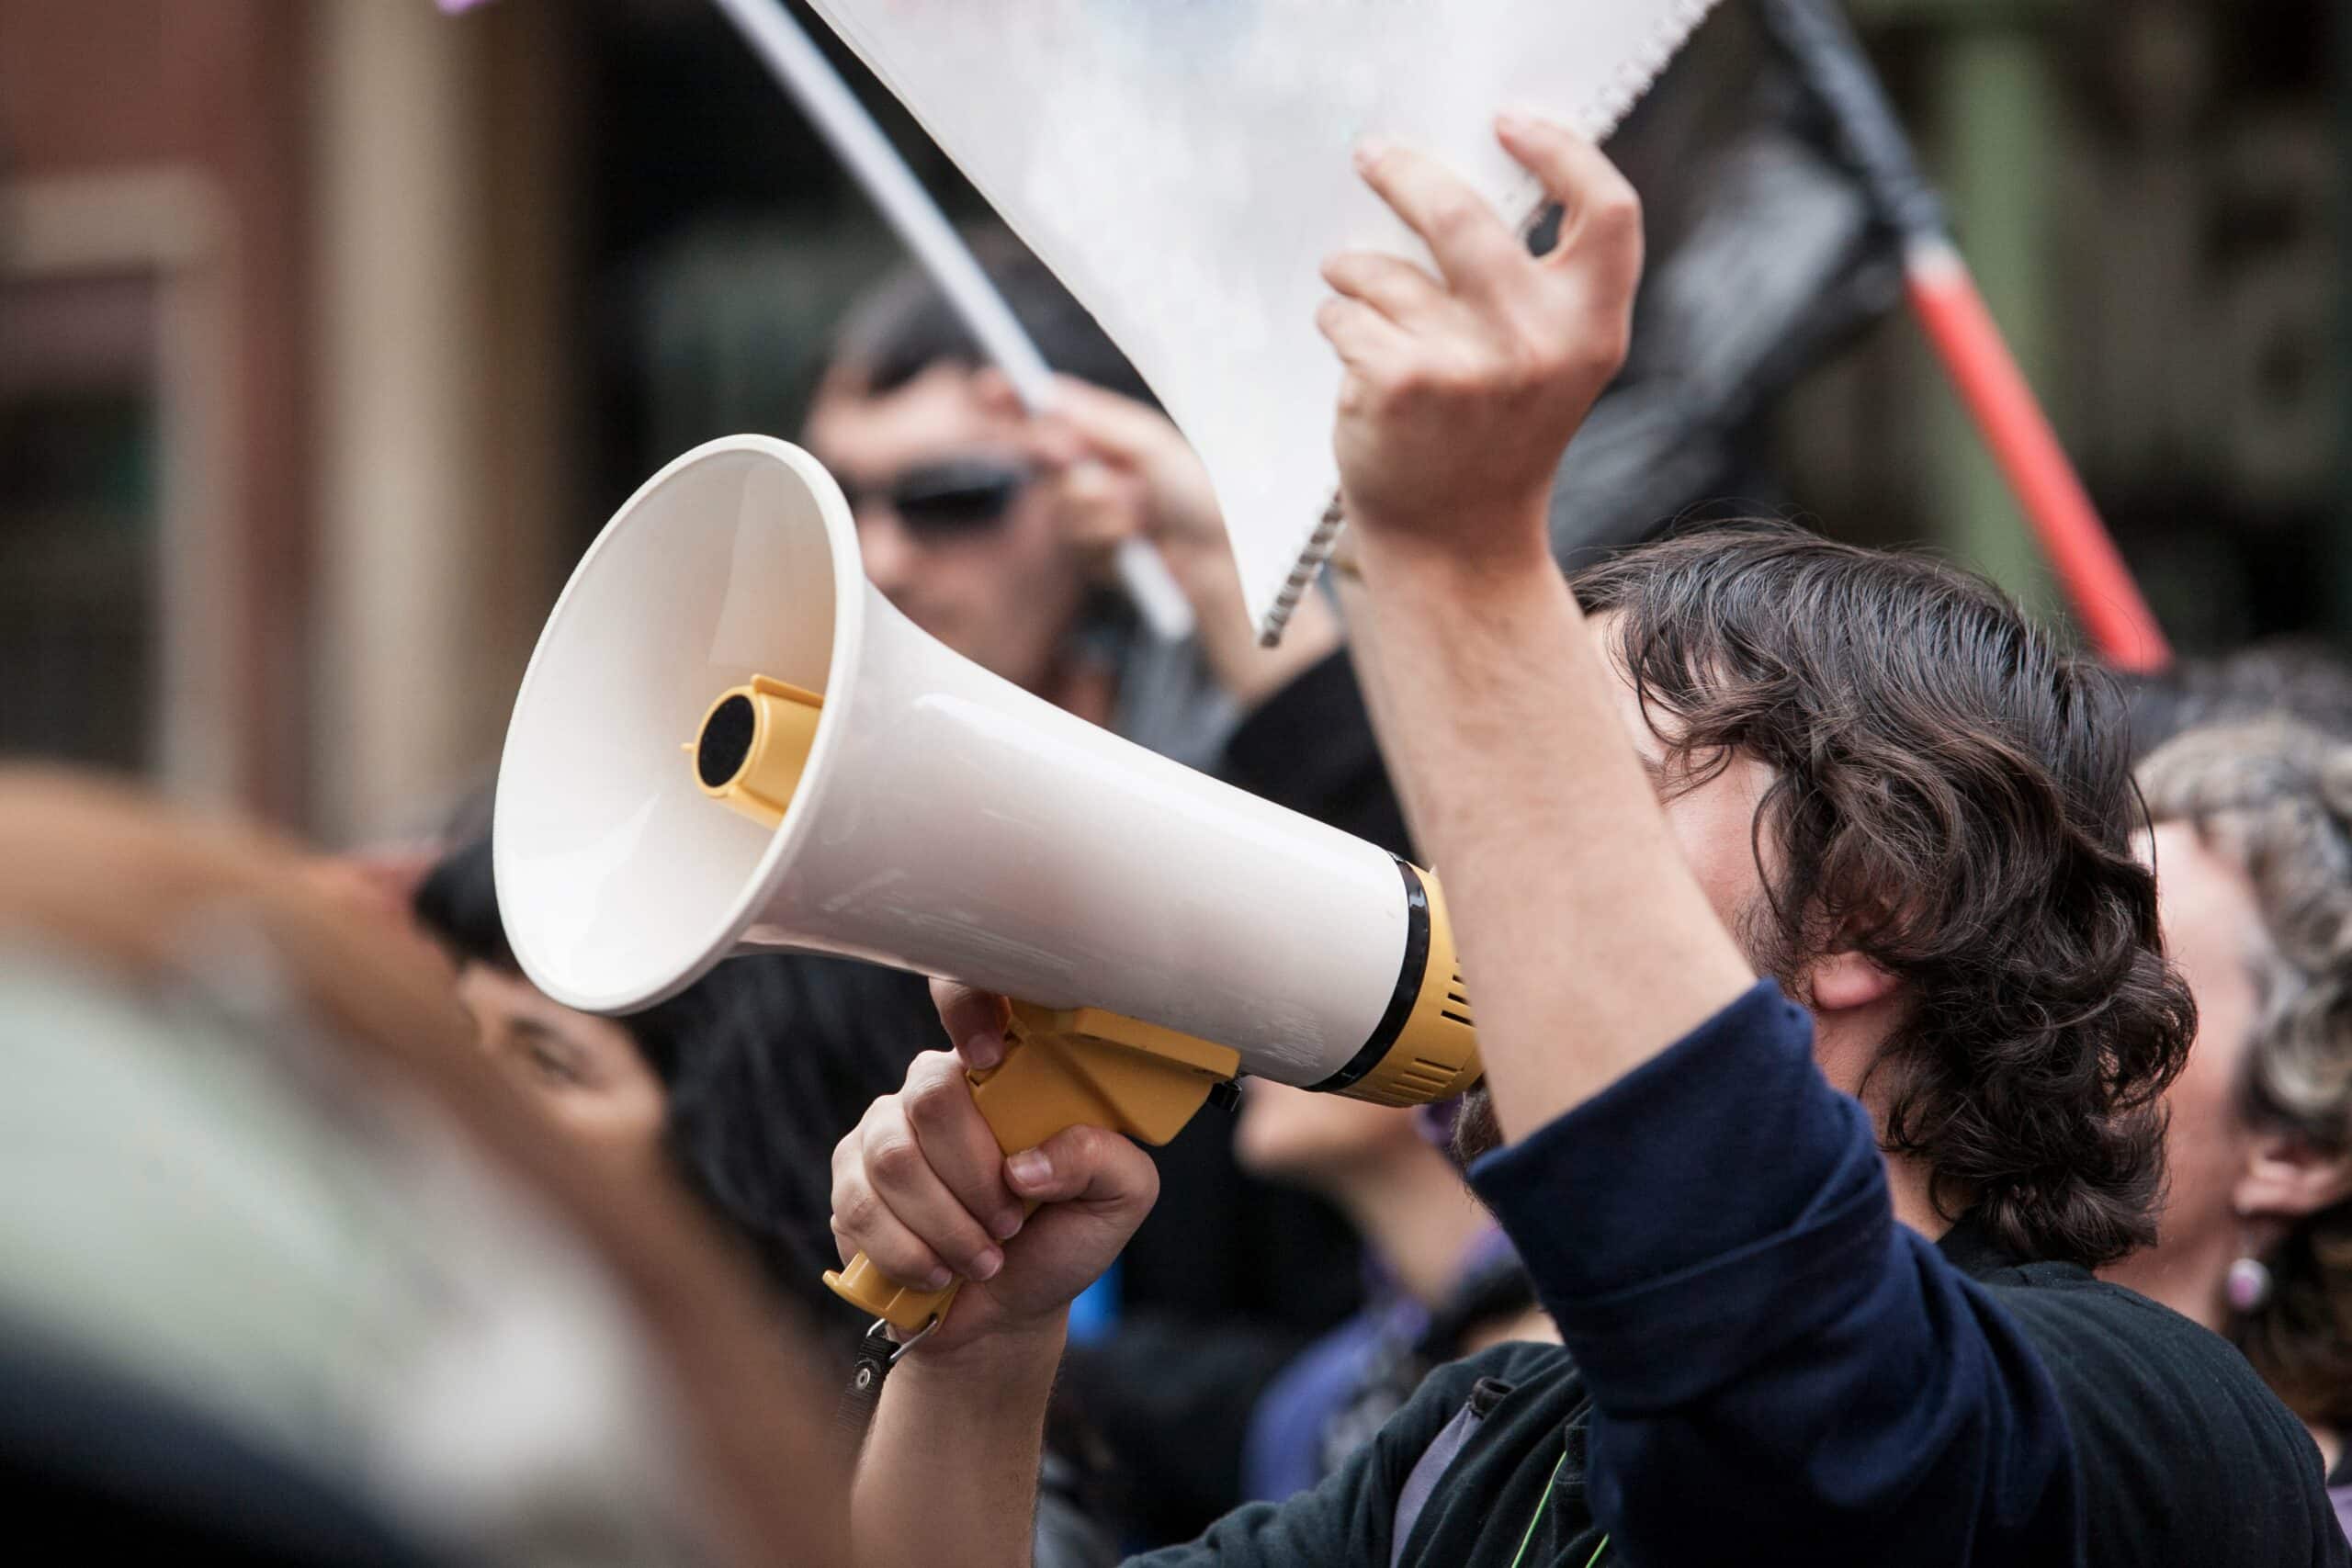 A labor strike scene in Palo Alto, secured by Global Risk Solutions, with an activist using a megaphone.